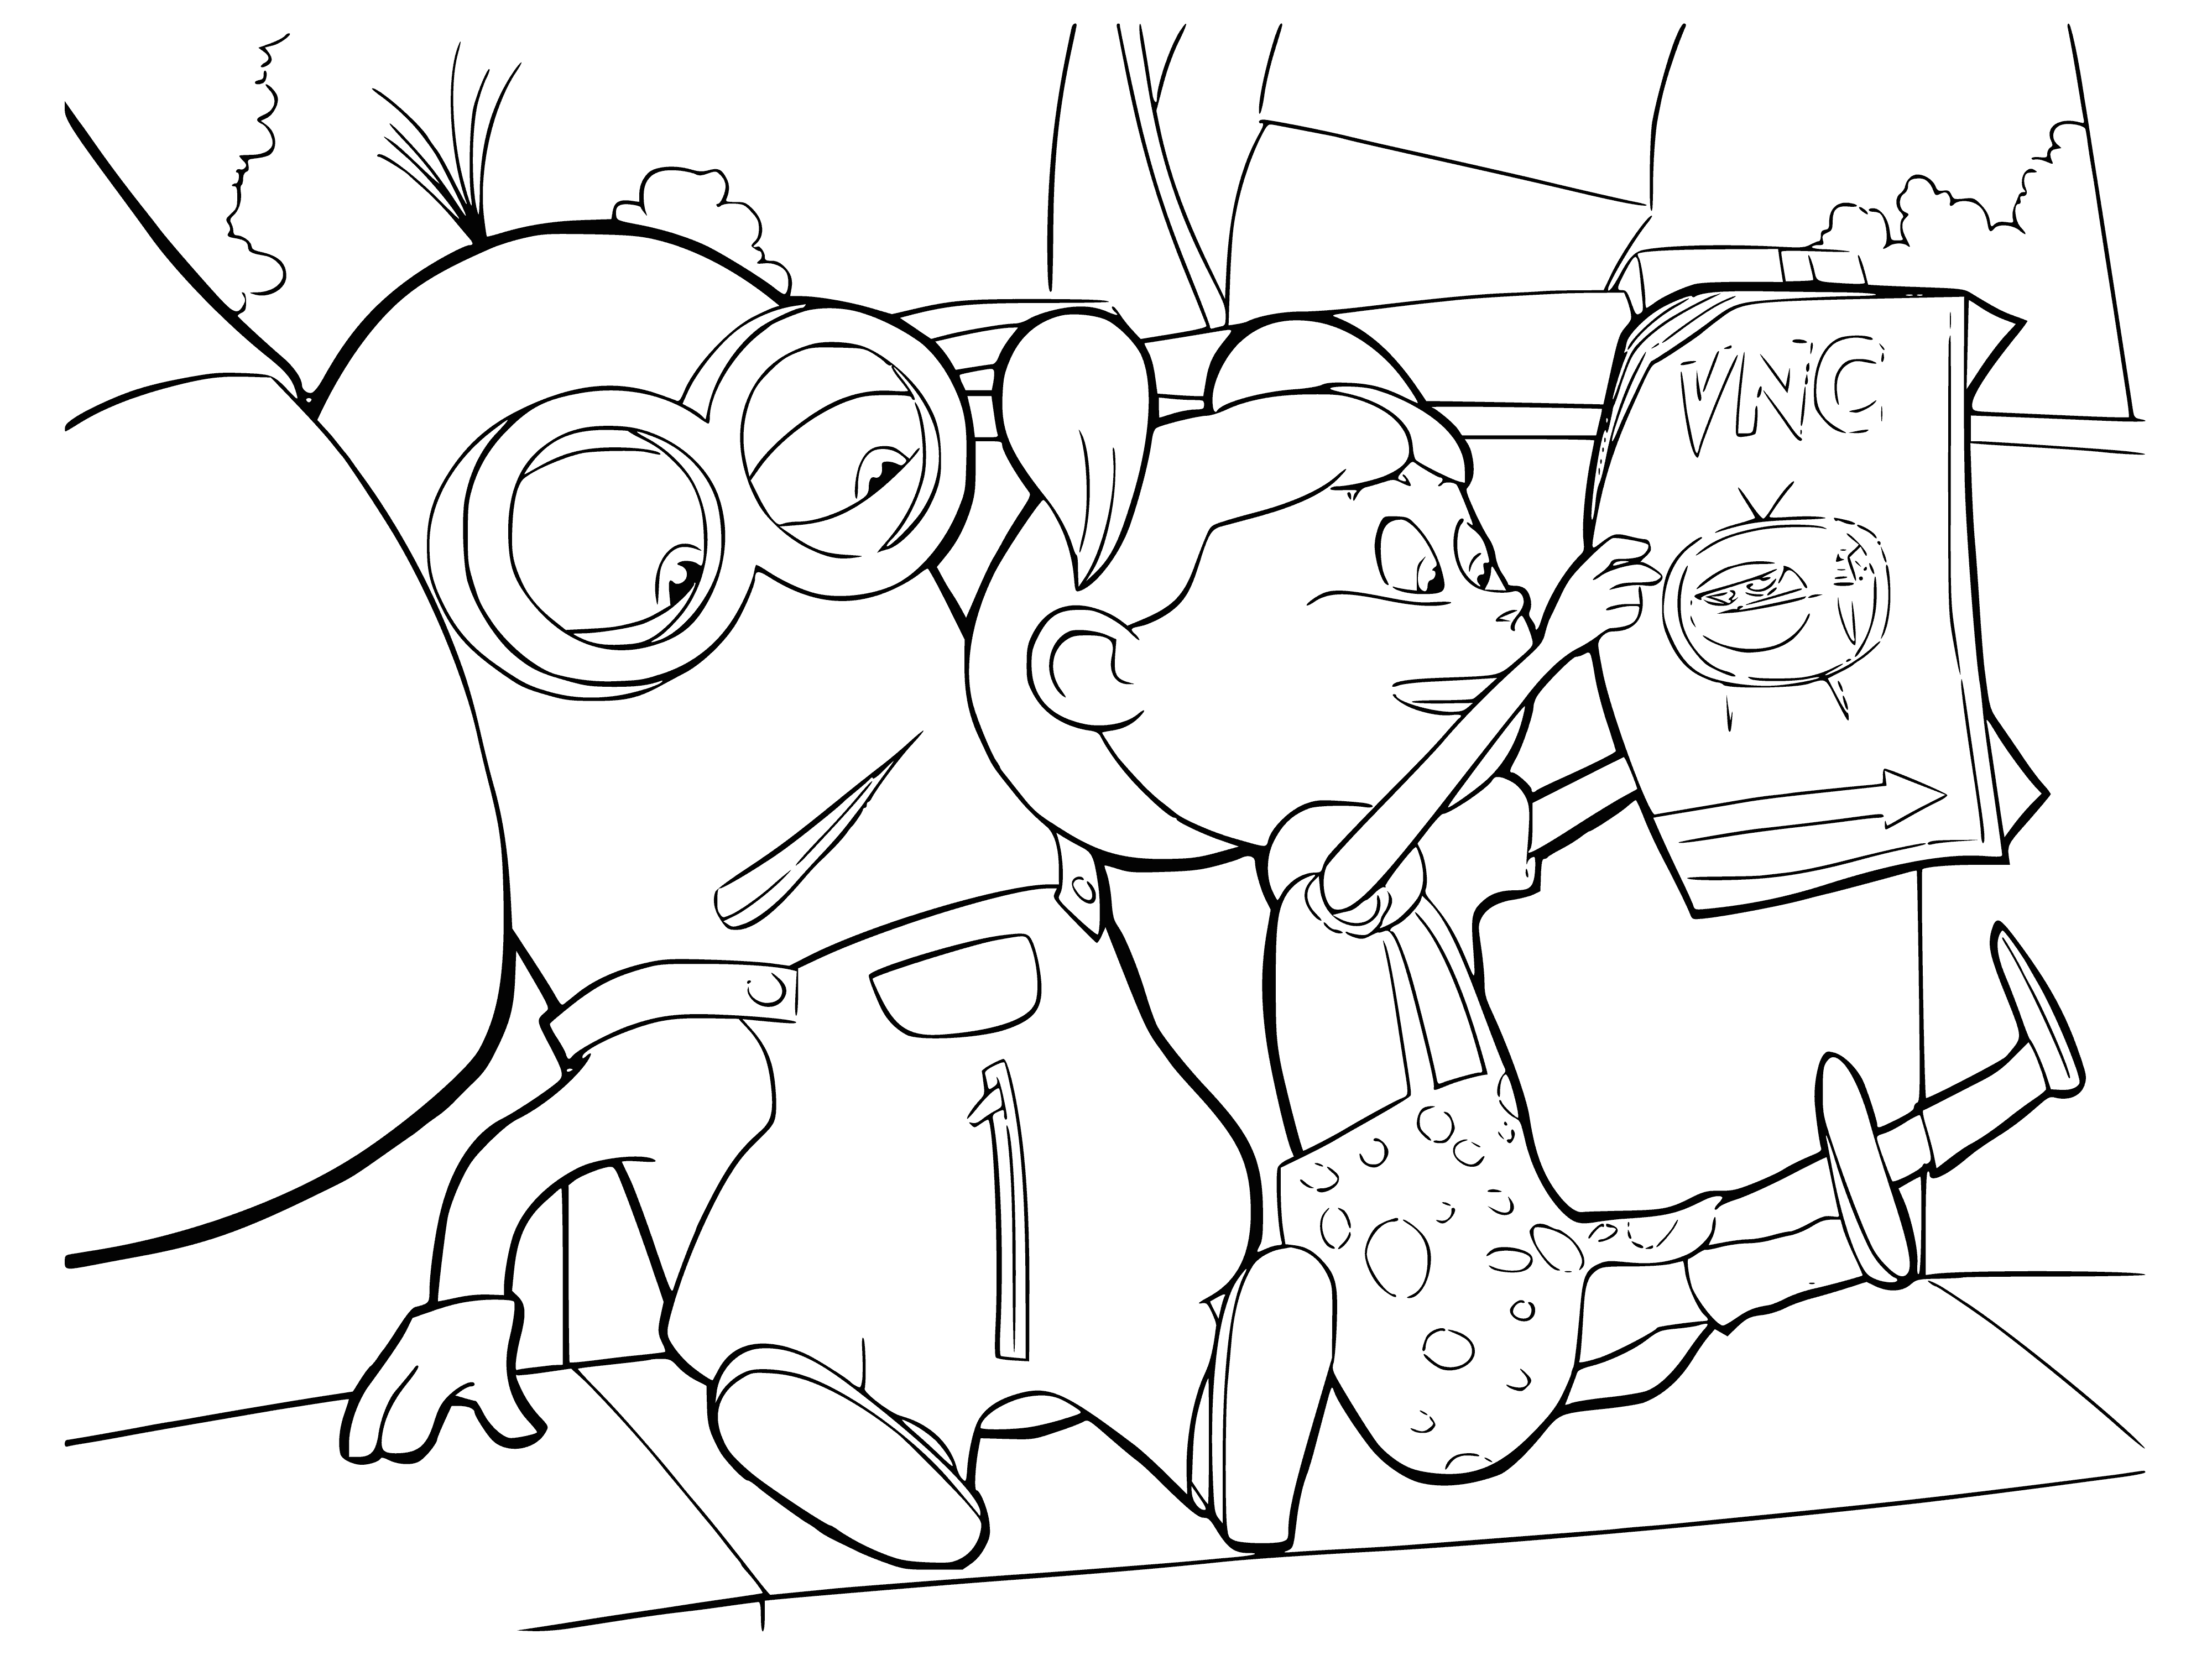 Mignon Kevin in the car coloring page